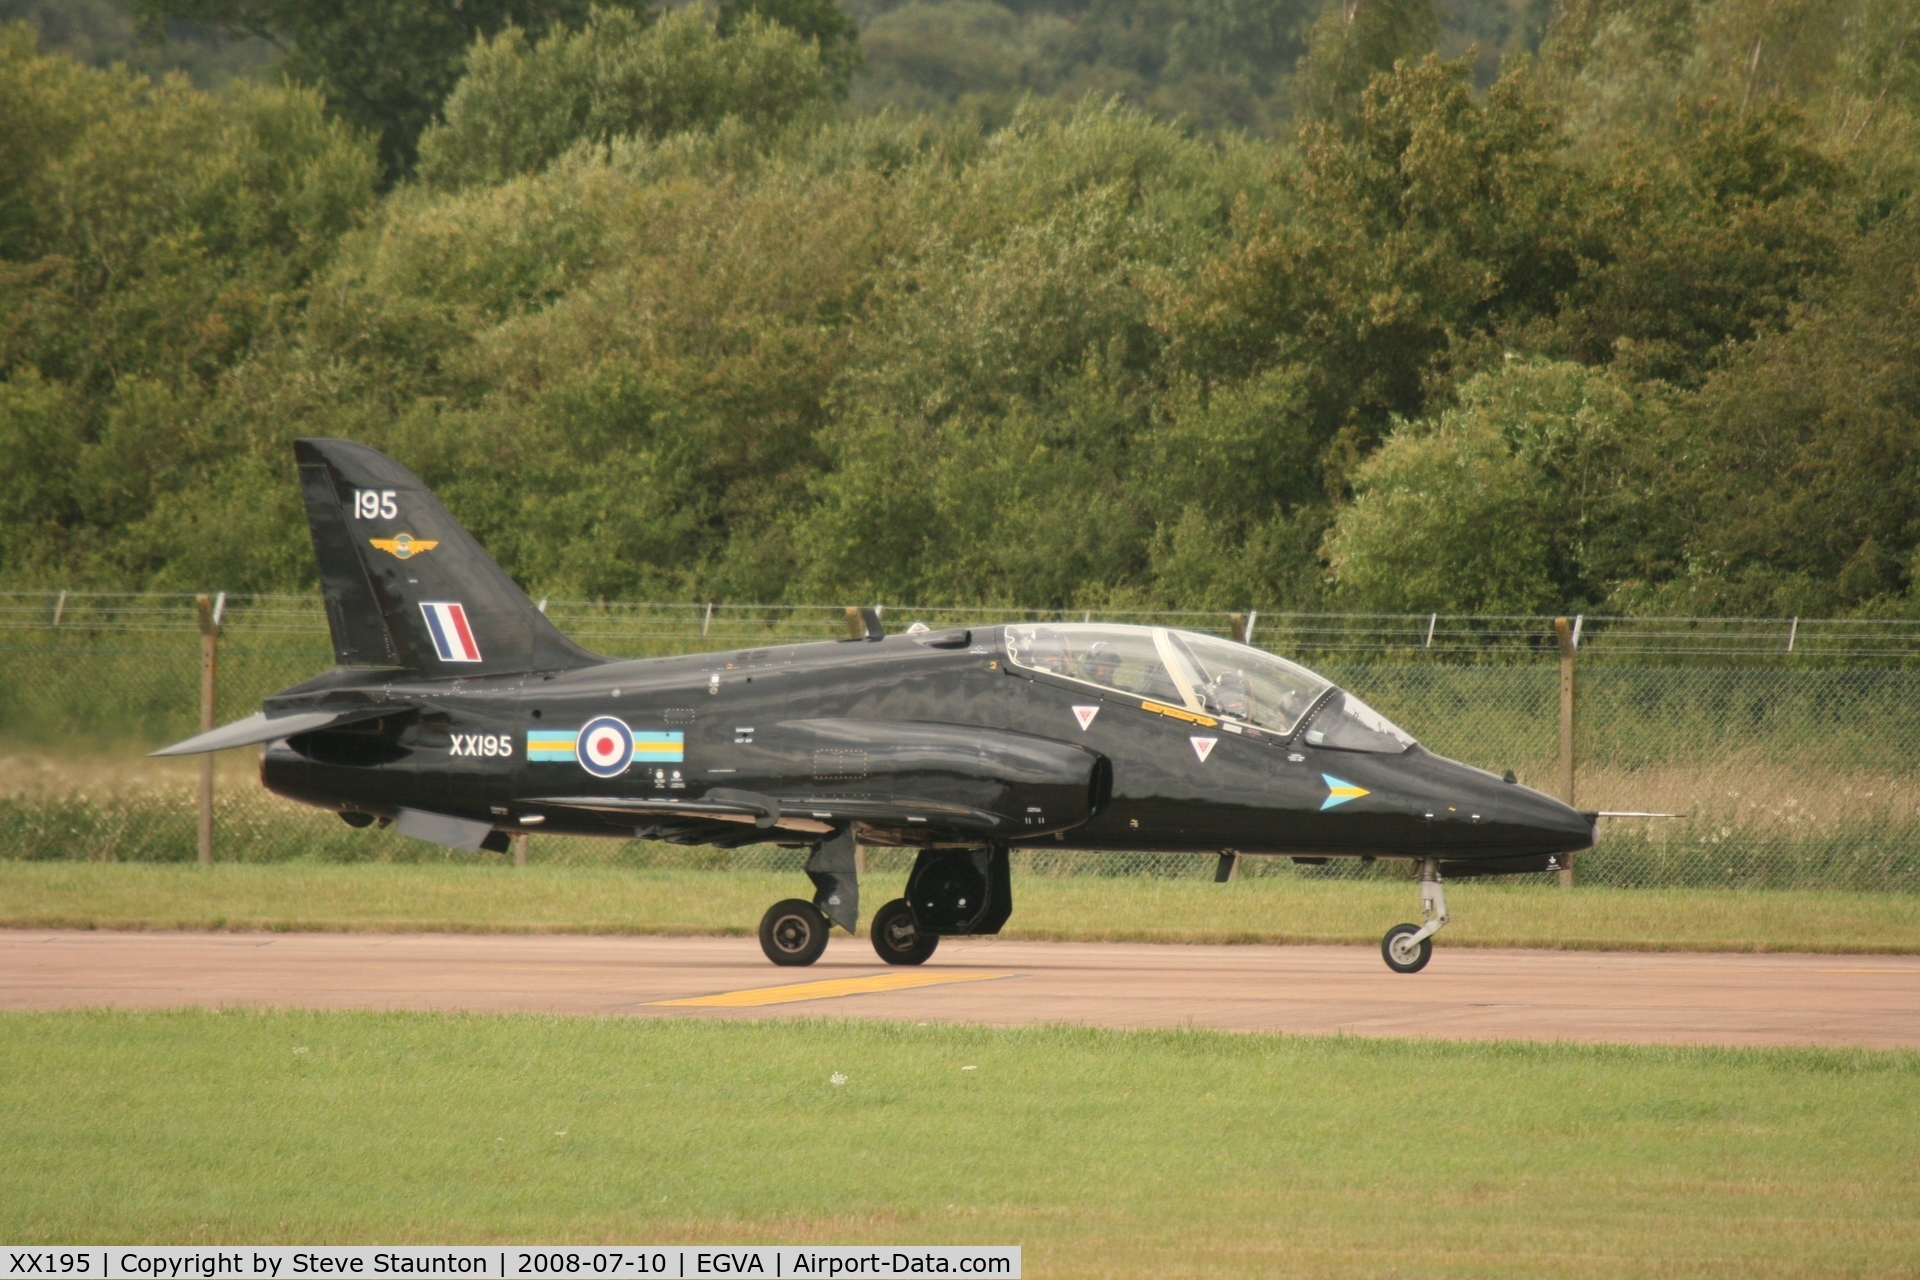 XX195, 1978 Hawker Siddeley Hawk T.1 C/N 042/312042, Taken at the Royal International Air Tattoo 2008 during arrivals and departures (show days cancelled due to bad weather)